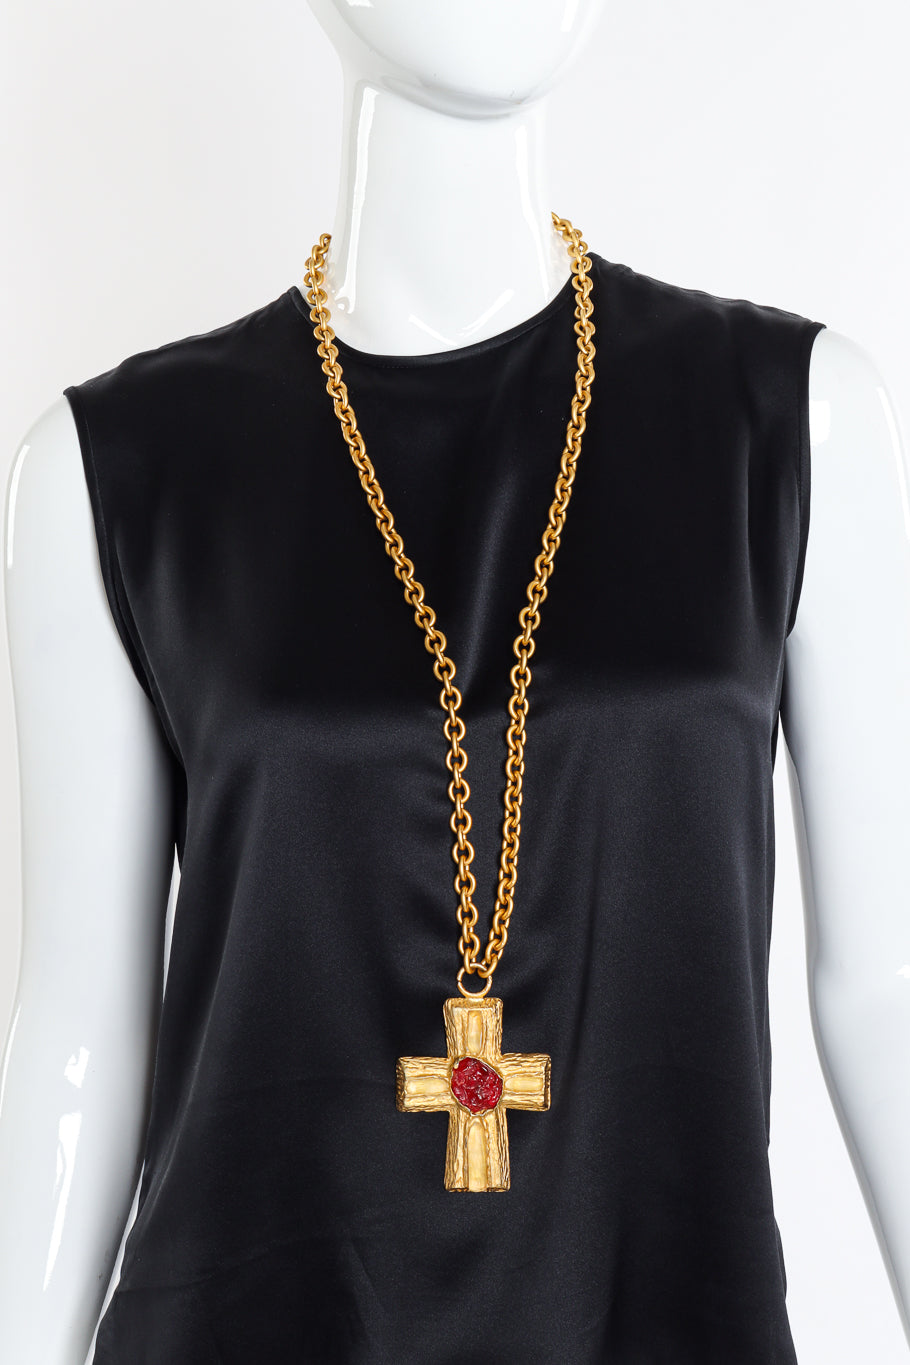 Long Raw Gem Cross Necklace by MCM on mannequin @recessla